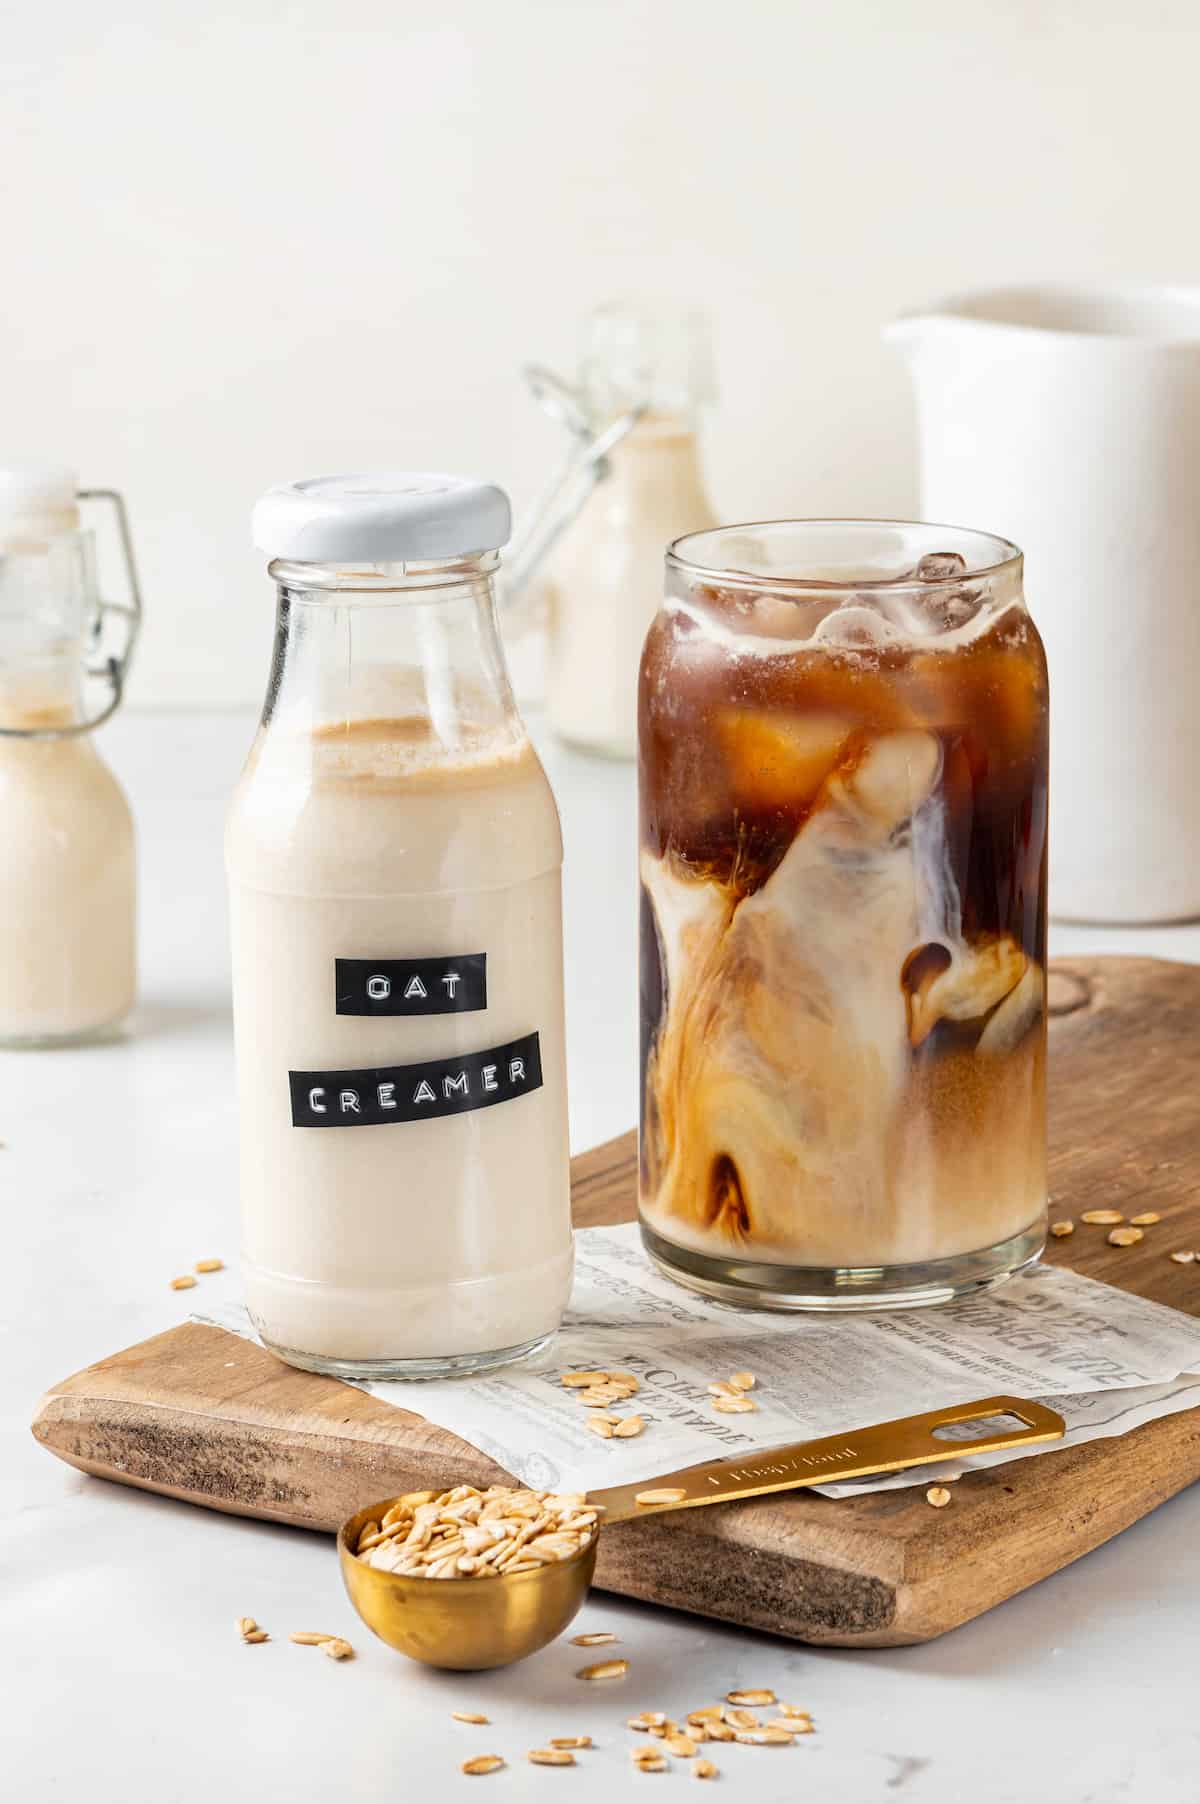 Oat milk coffee creamer set next to glass of iced coffee on cutting board